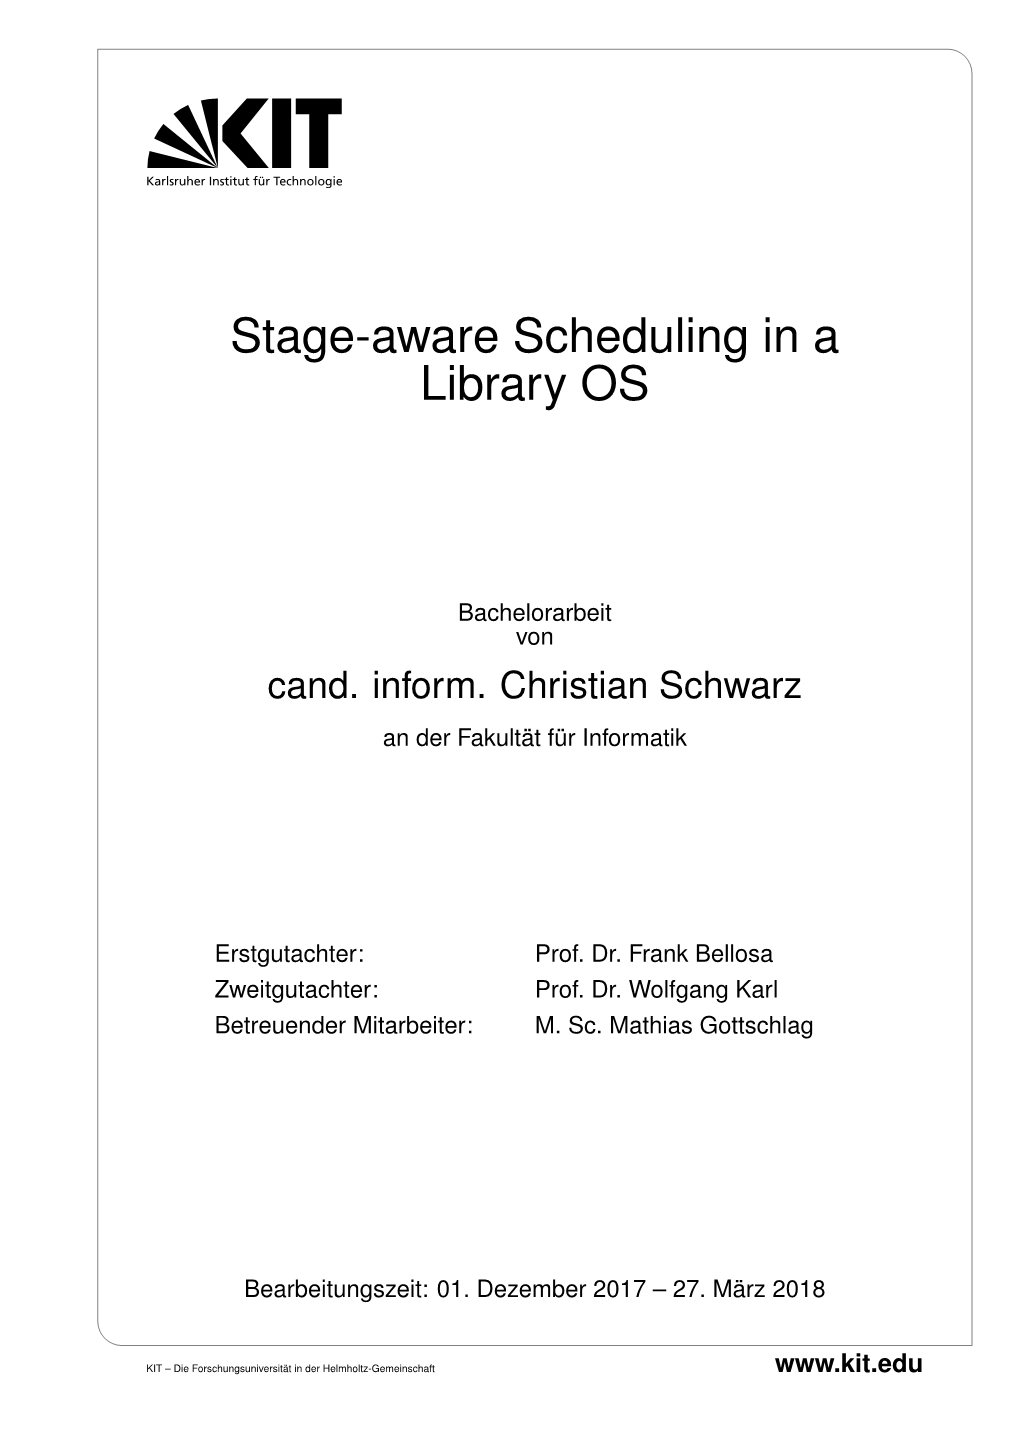 Stage-Aware Scheduling in a Library OS